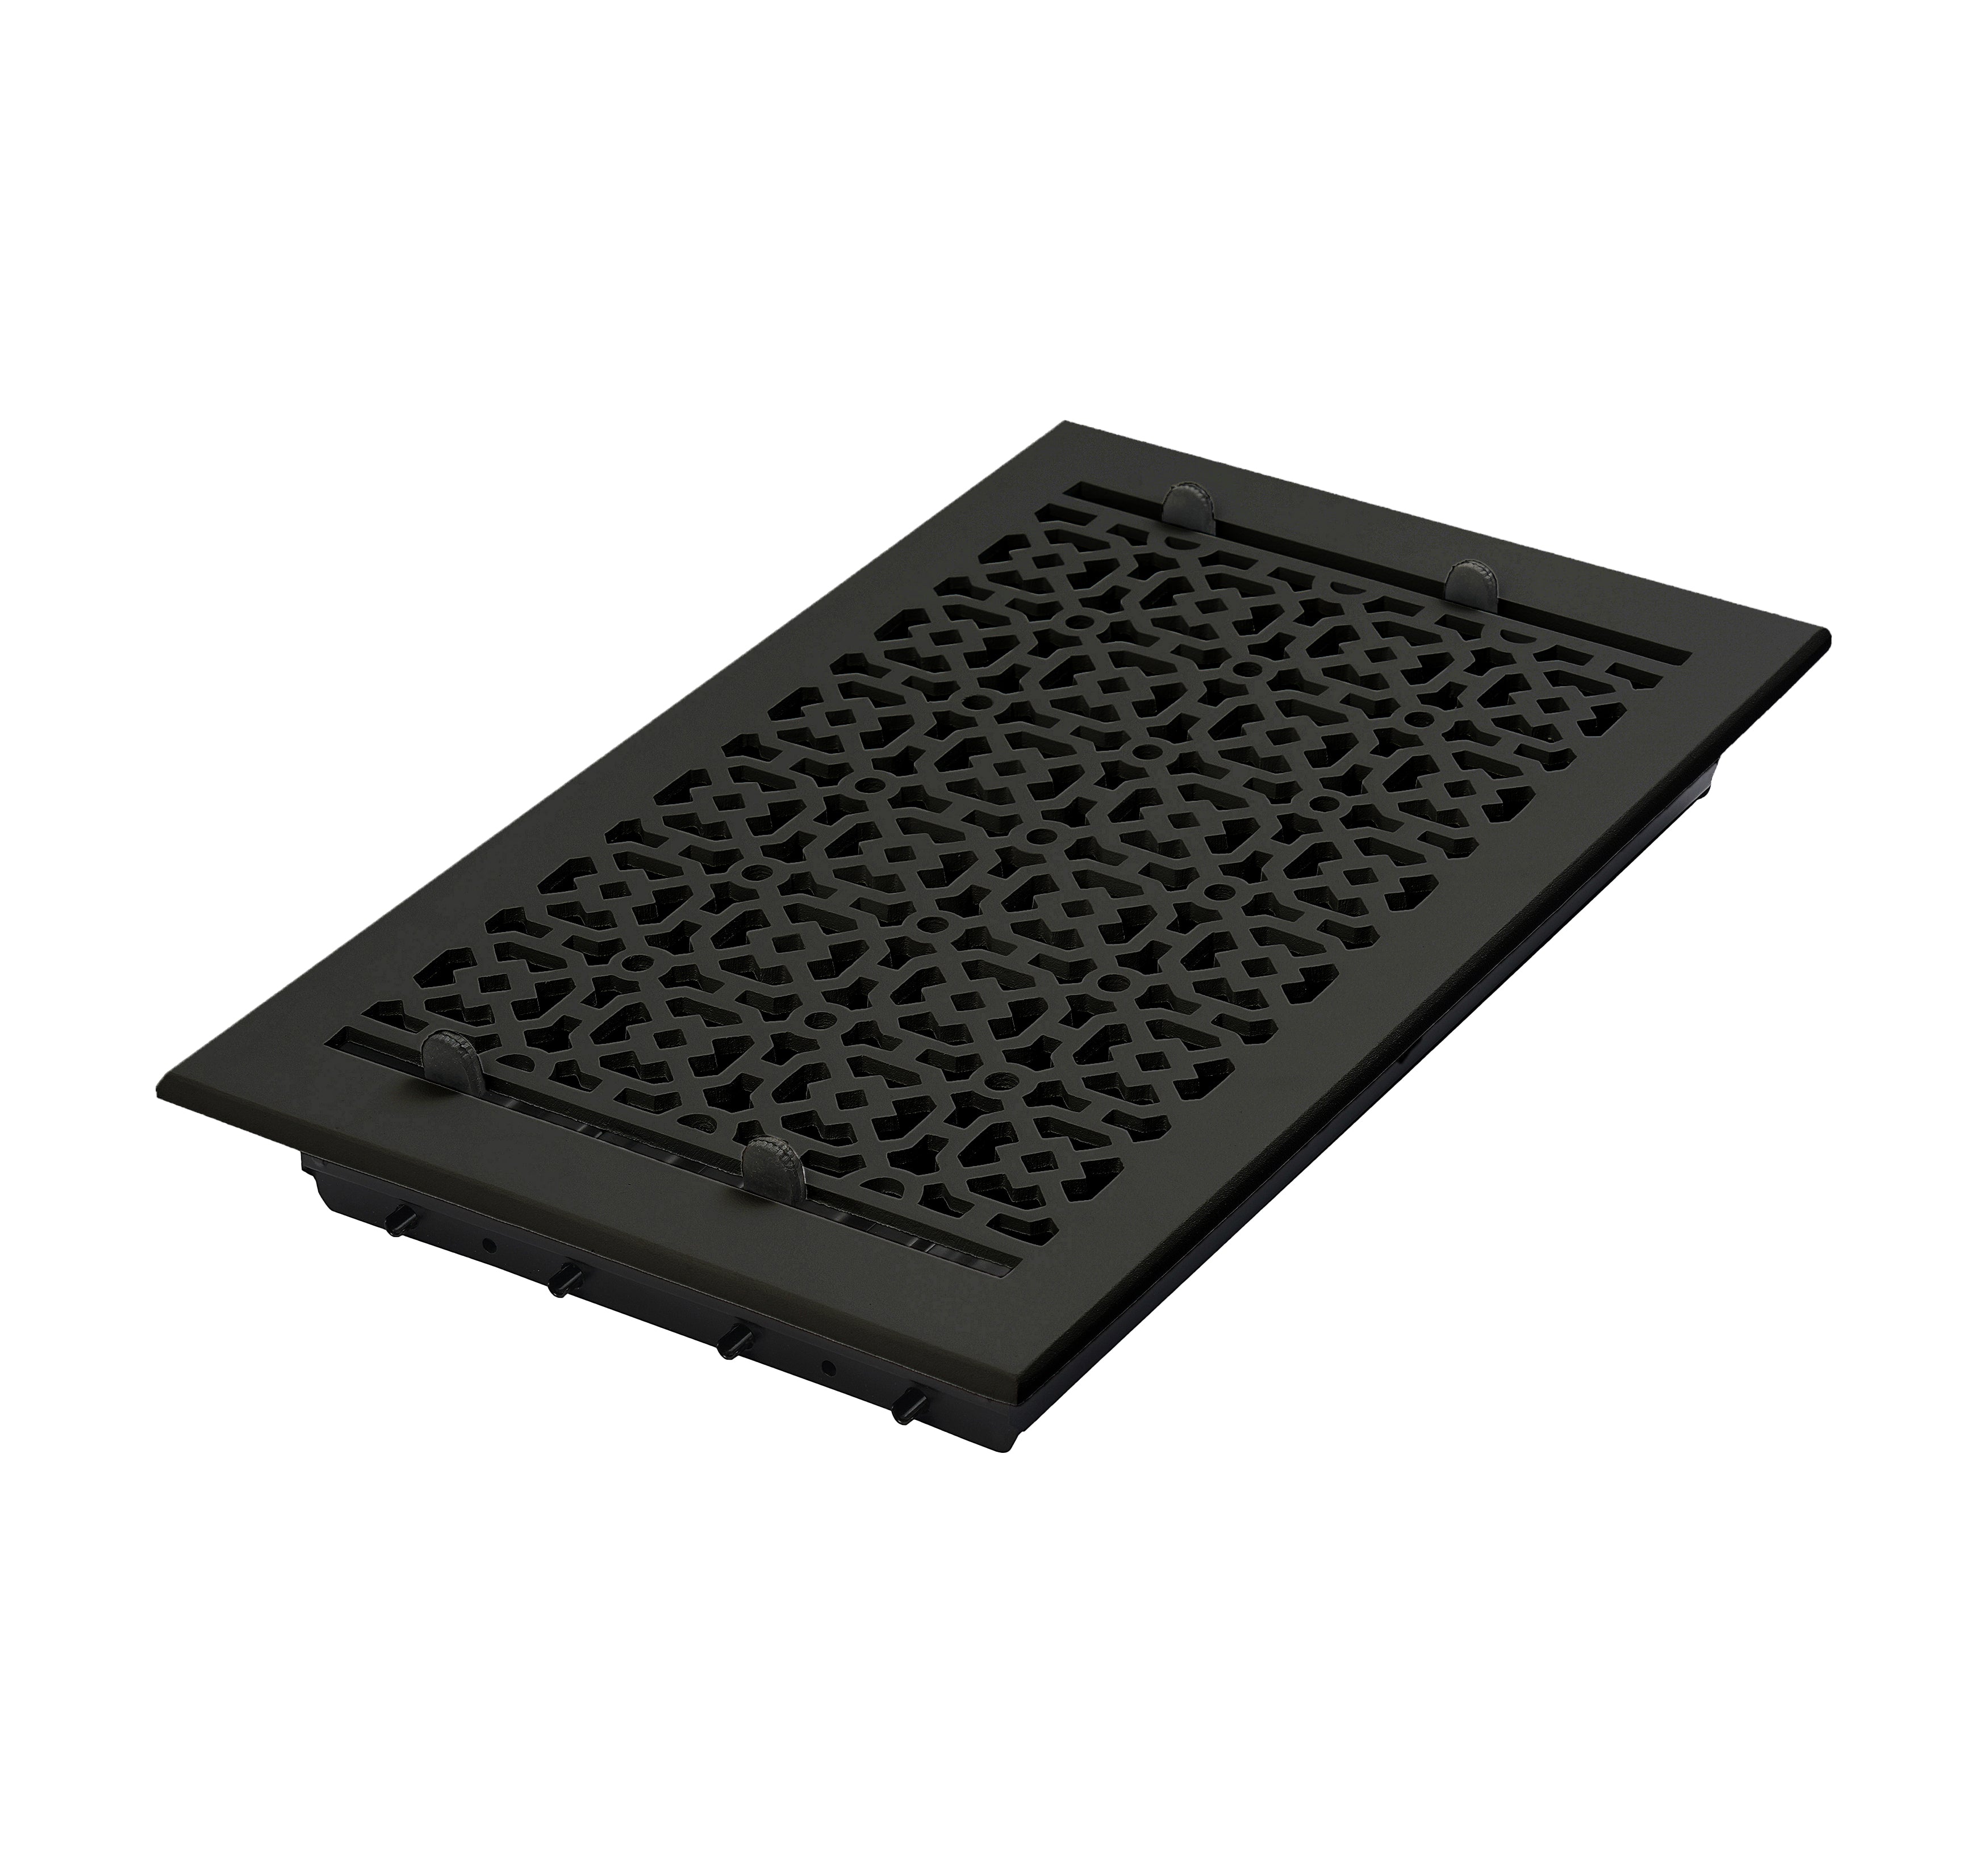 Achtek Air Supply Vent 8"x 10" Duct Opening (Overall 9-1/2"x 11-1/2") Solid Cast Aluminium Register Cover | Powder Coated